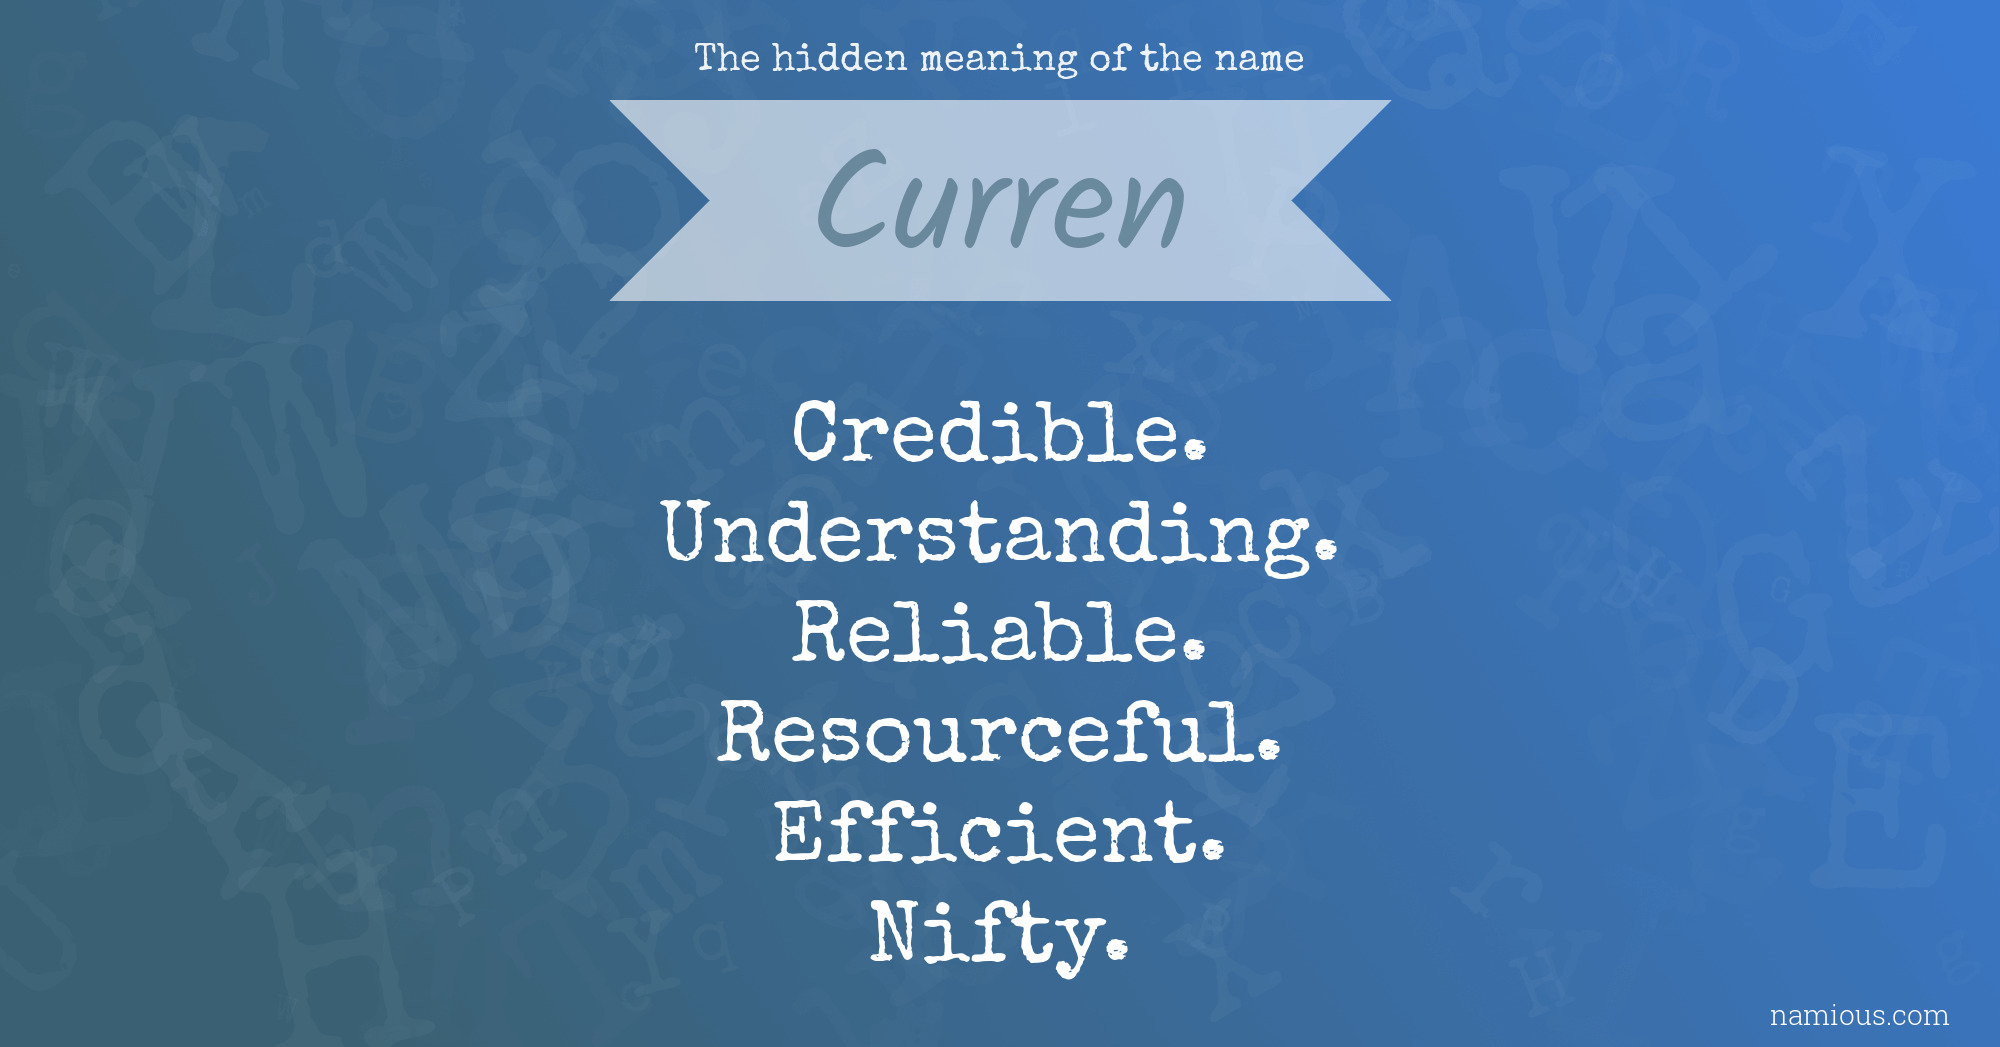 The hidden meaning of the name Curren